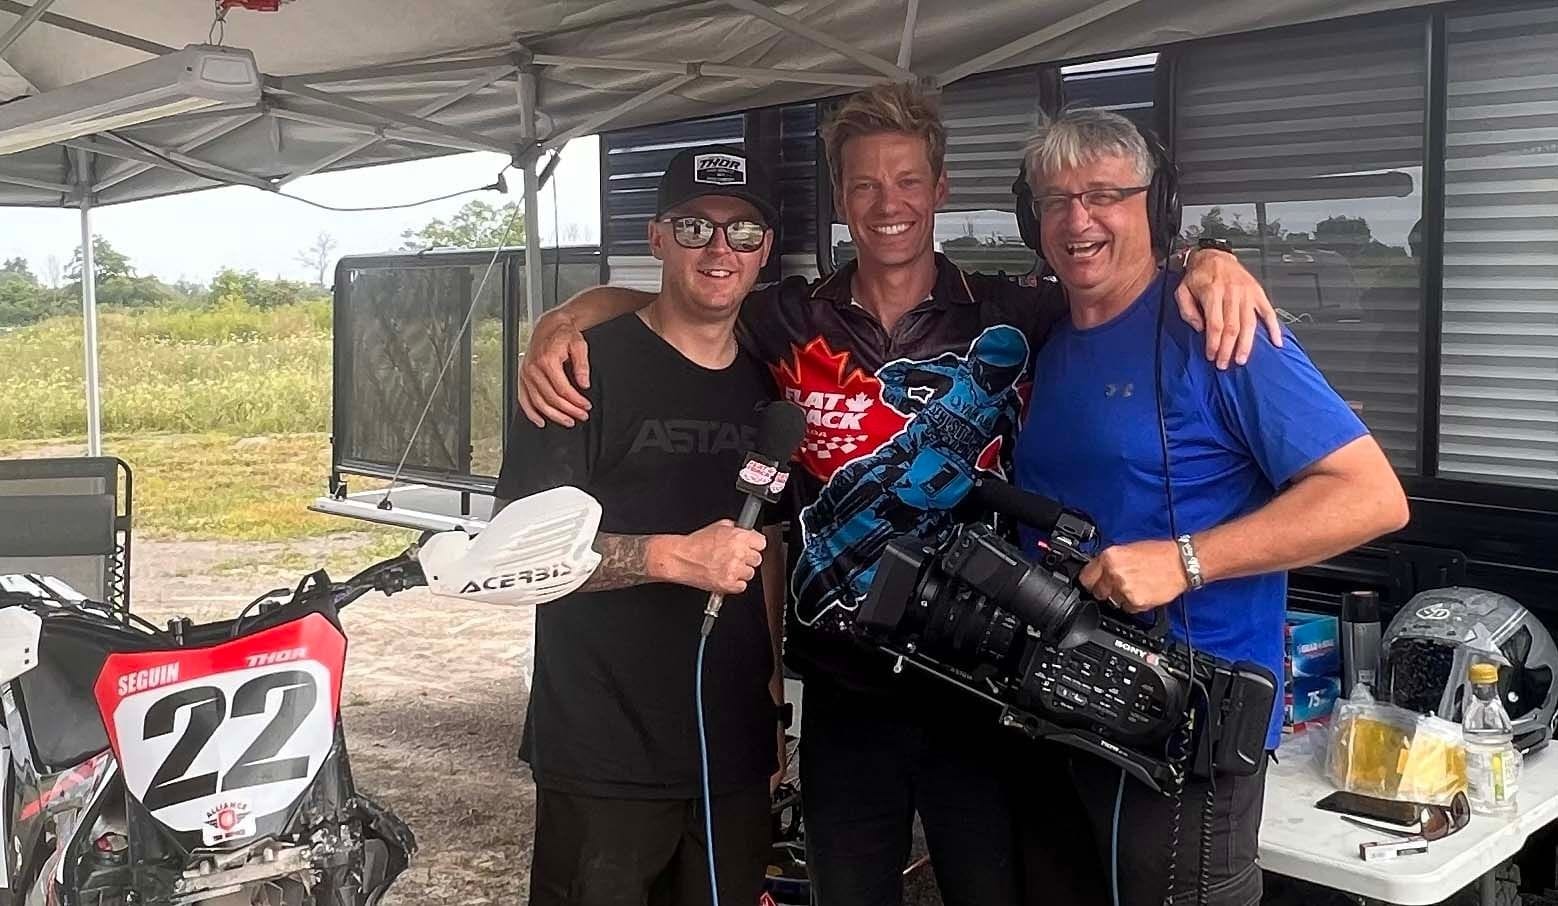 Flat Track Canada has made use of our mobile production studio and team to produce a live stream of their eventss well as create an edited version for TSN.